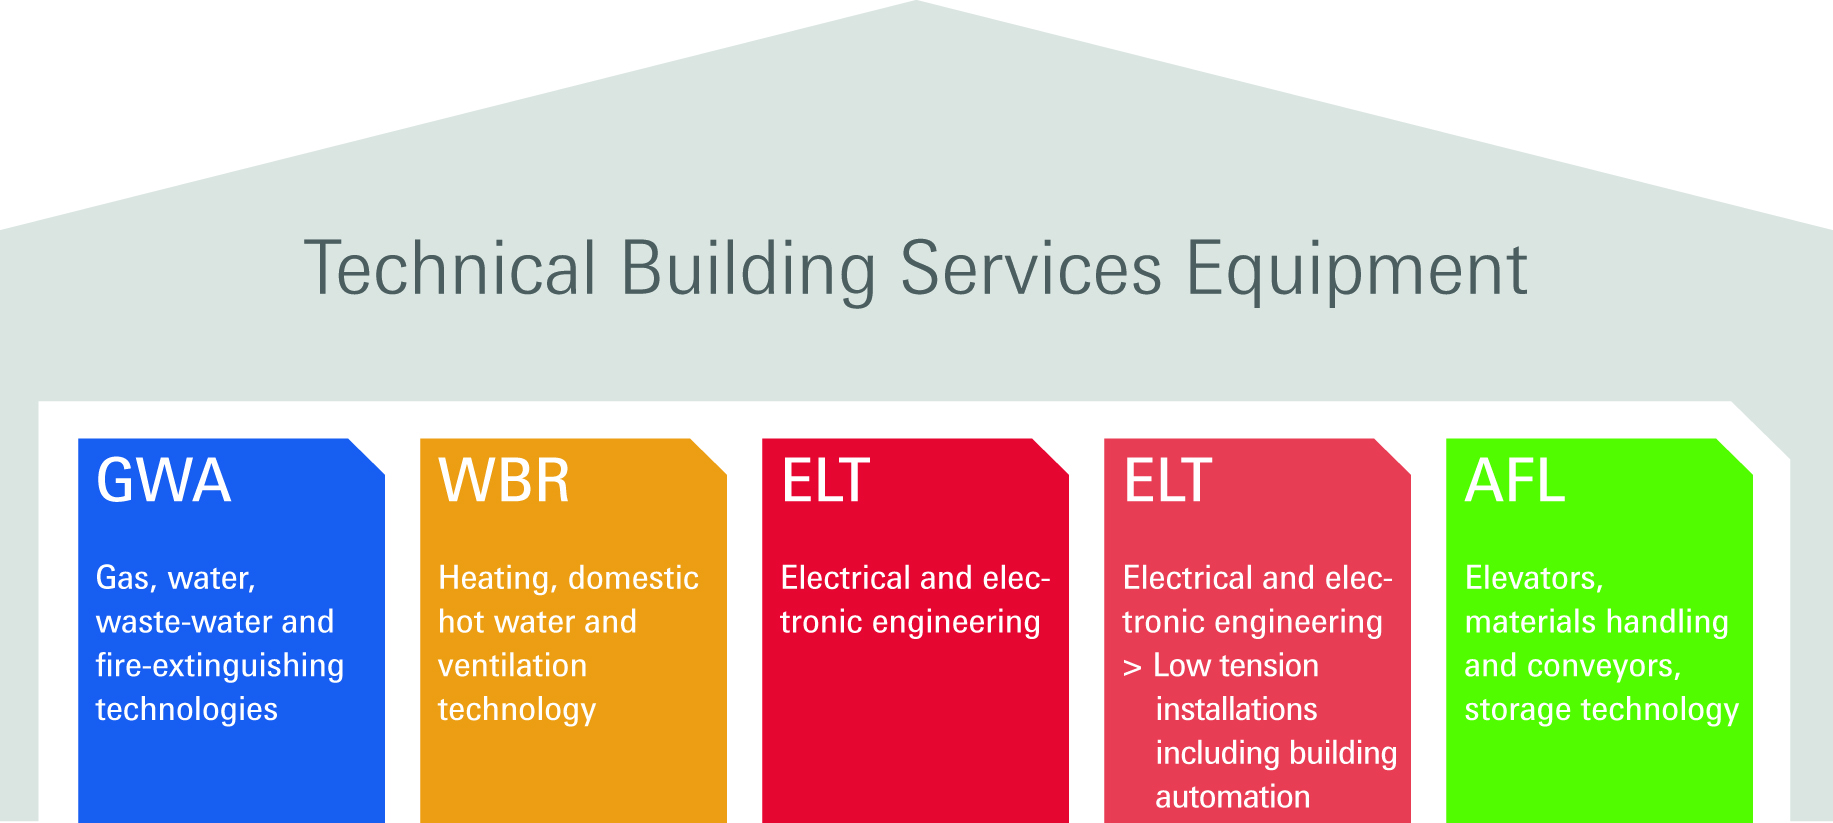 Technical Building Services Equipment